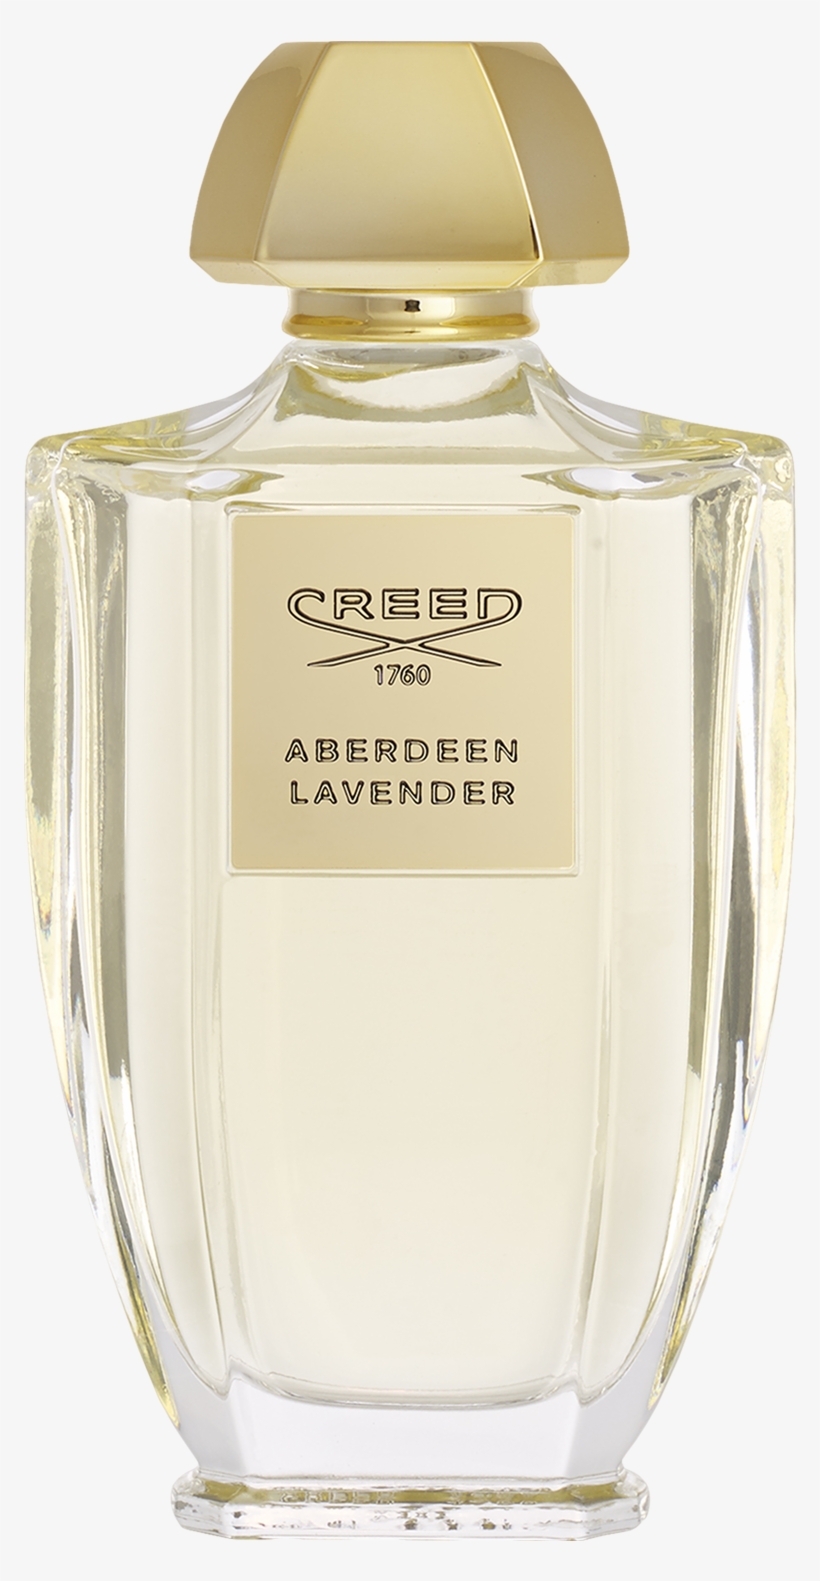 Perfume Aberdeen Lavander From Creed - Creed Vetiver Geranium, transparent png #4113052